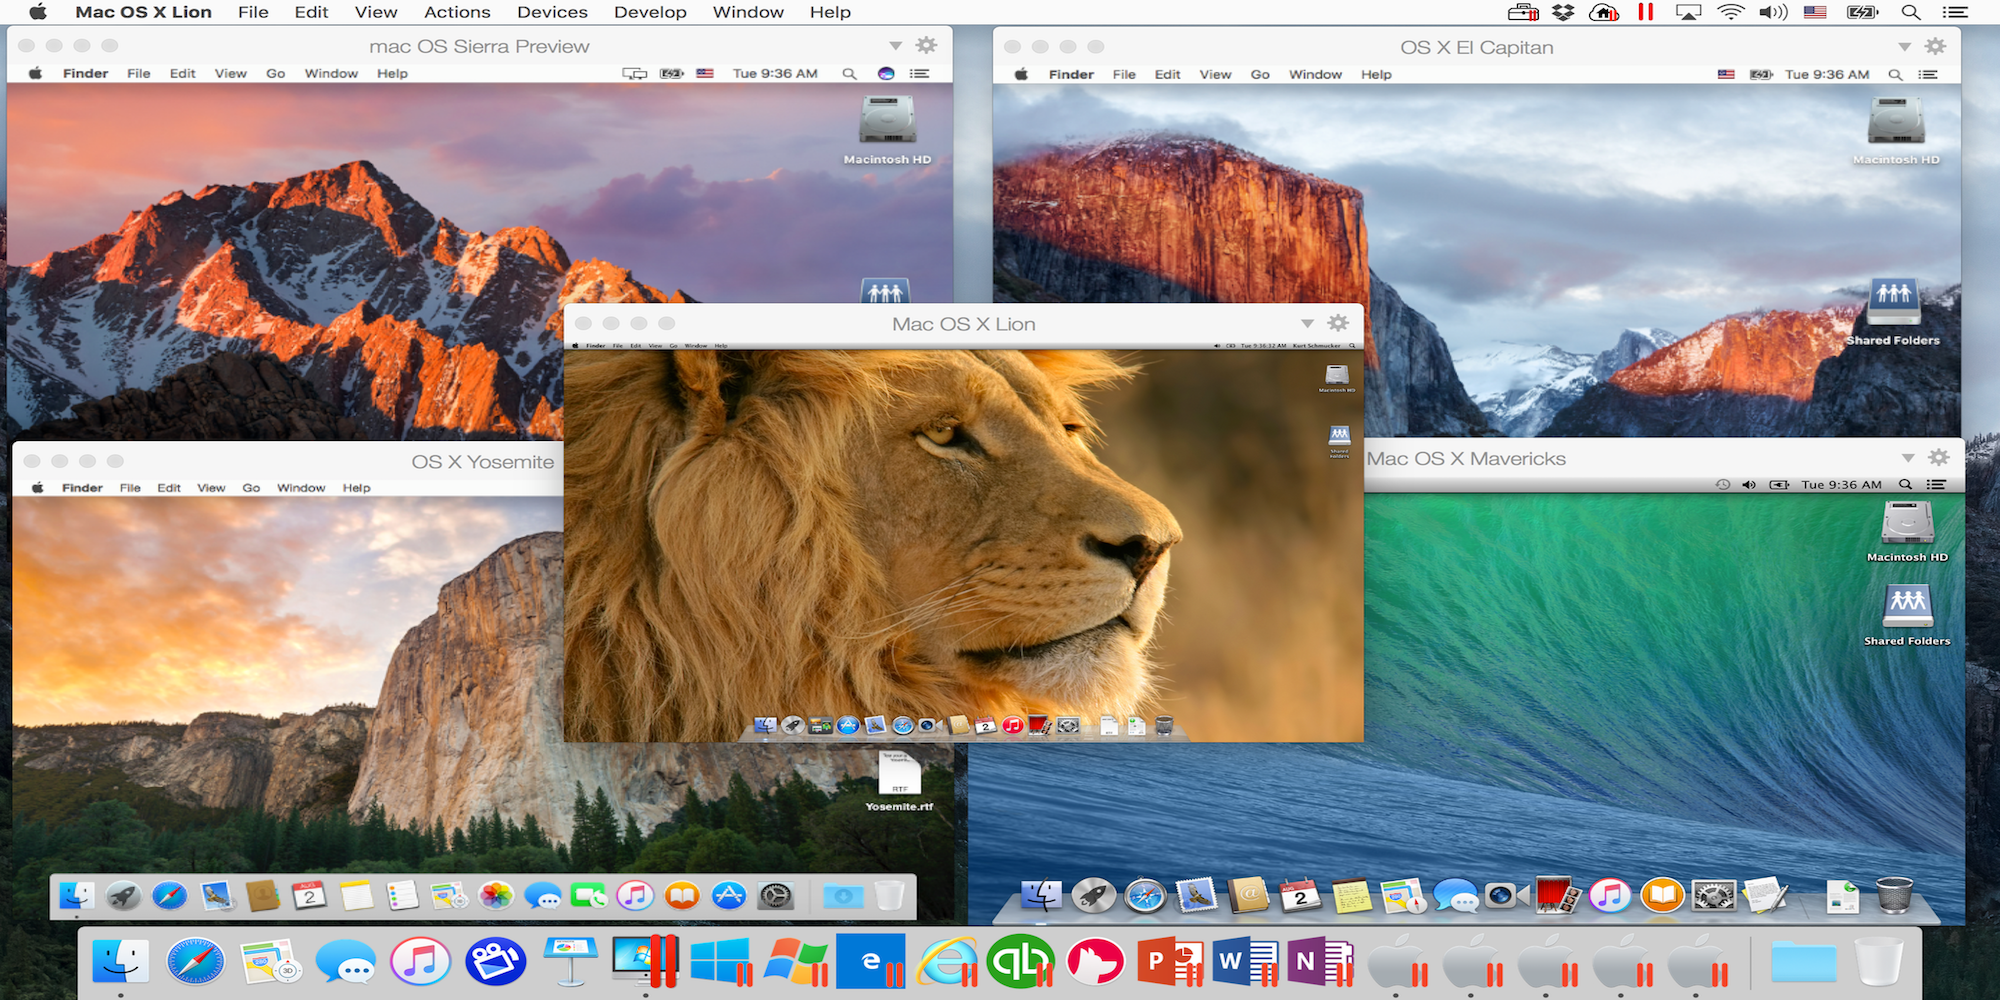 parallels download for the mac